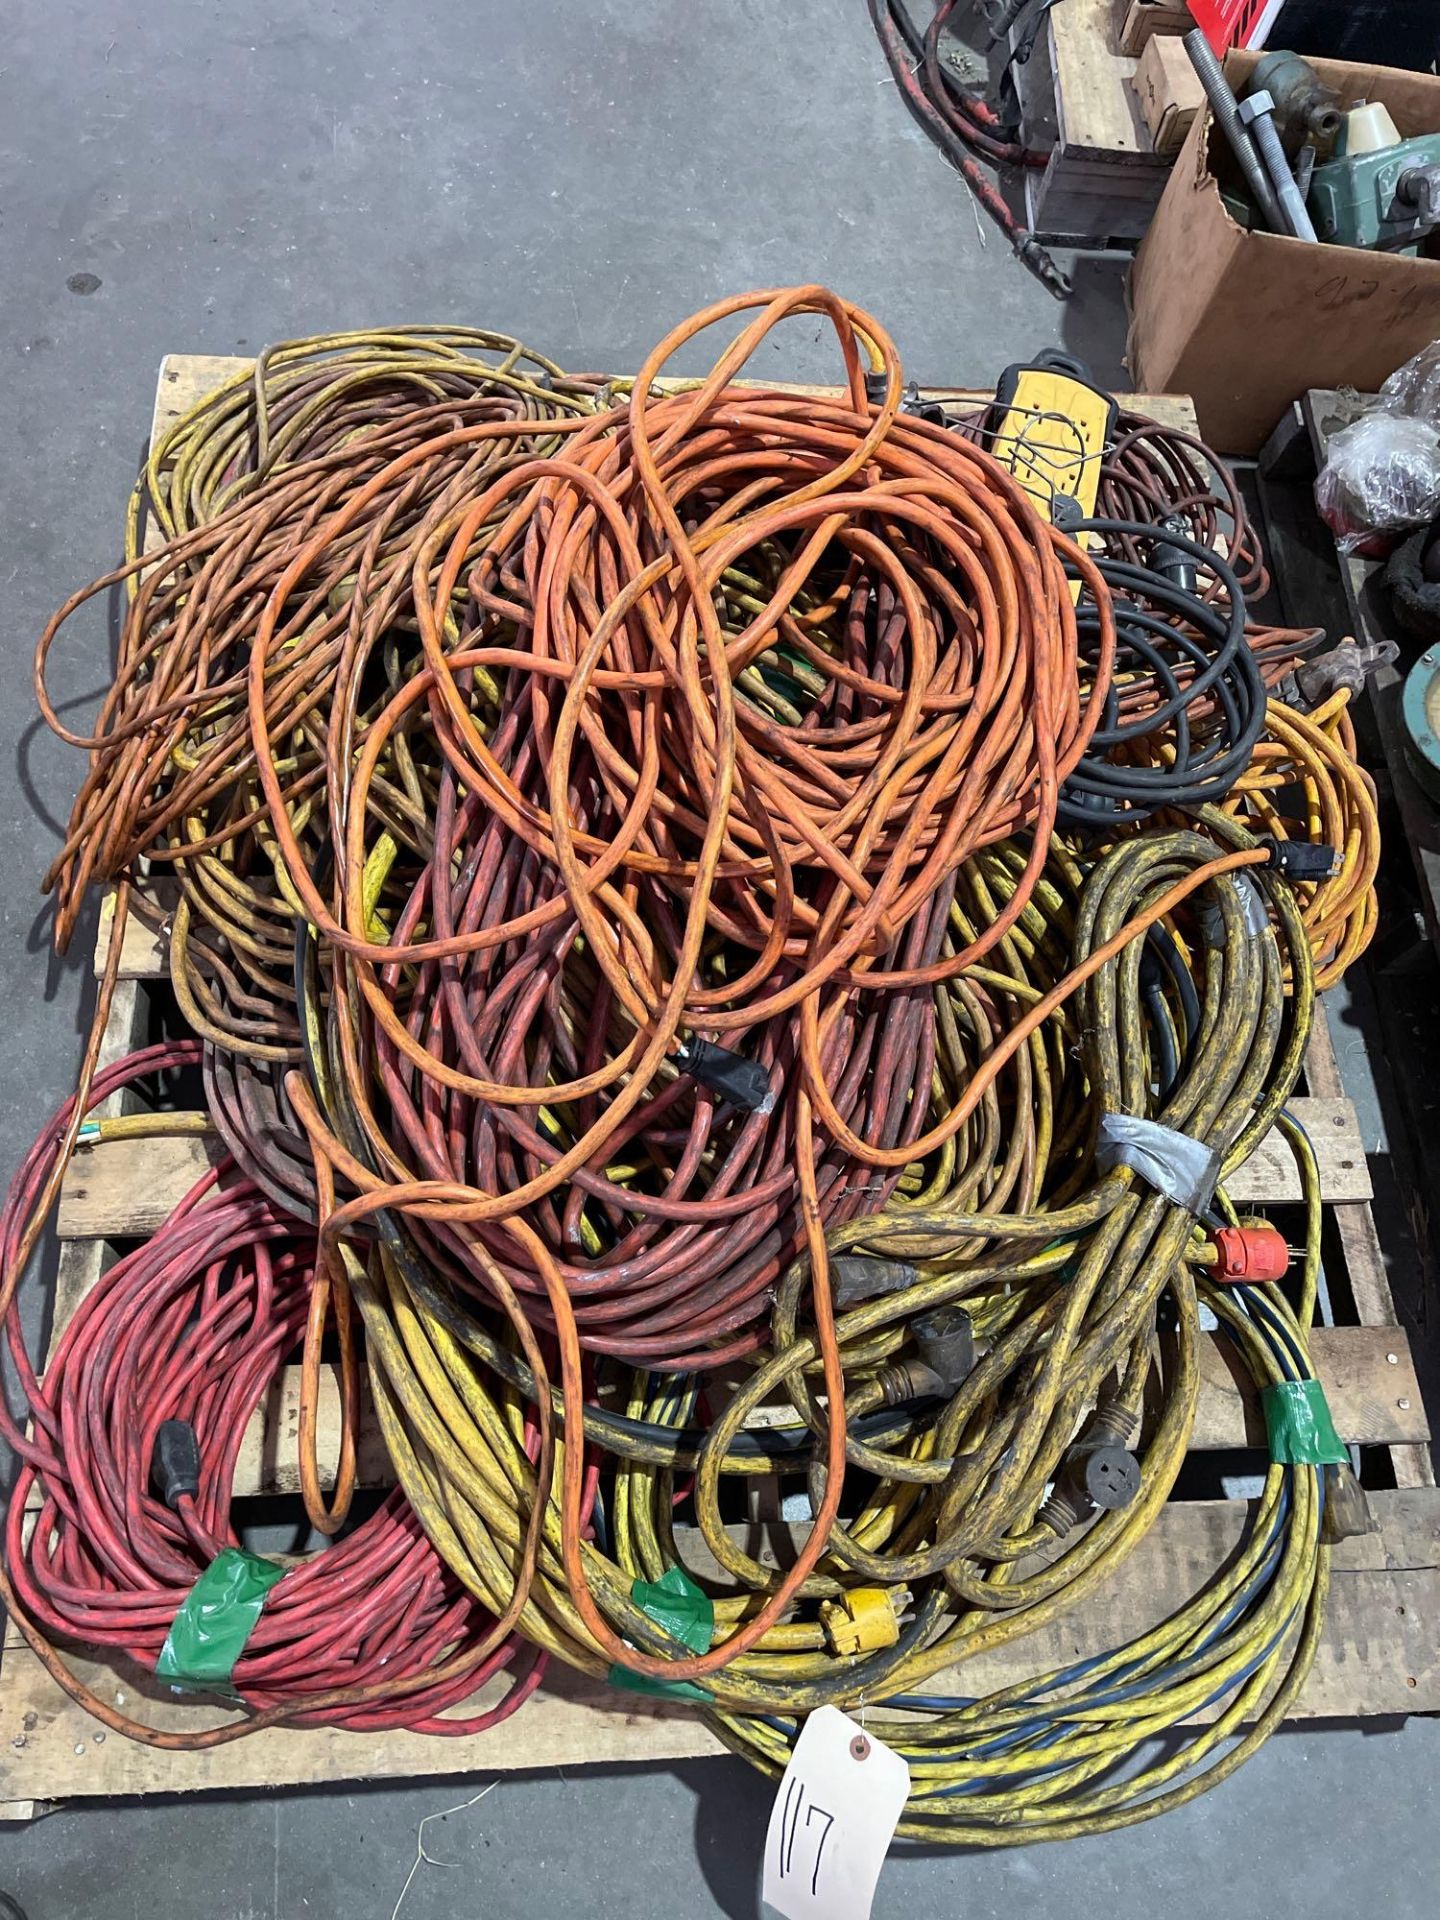 Lot of Extension Cable and String Lights